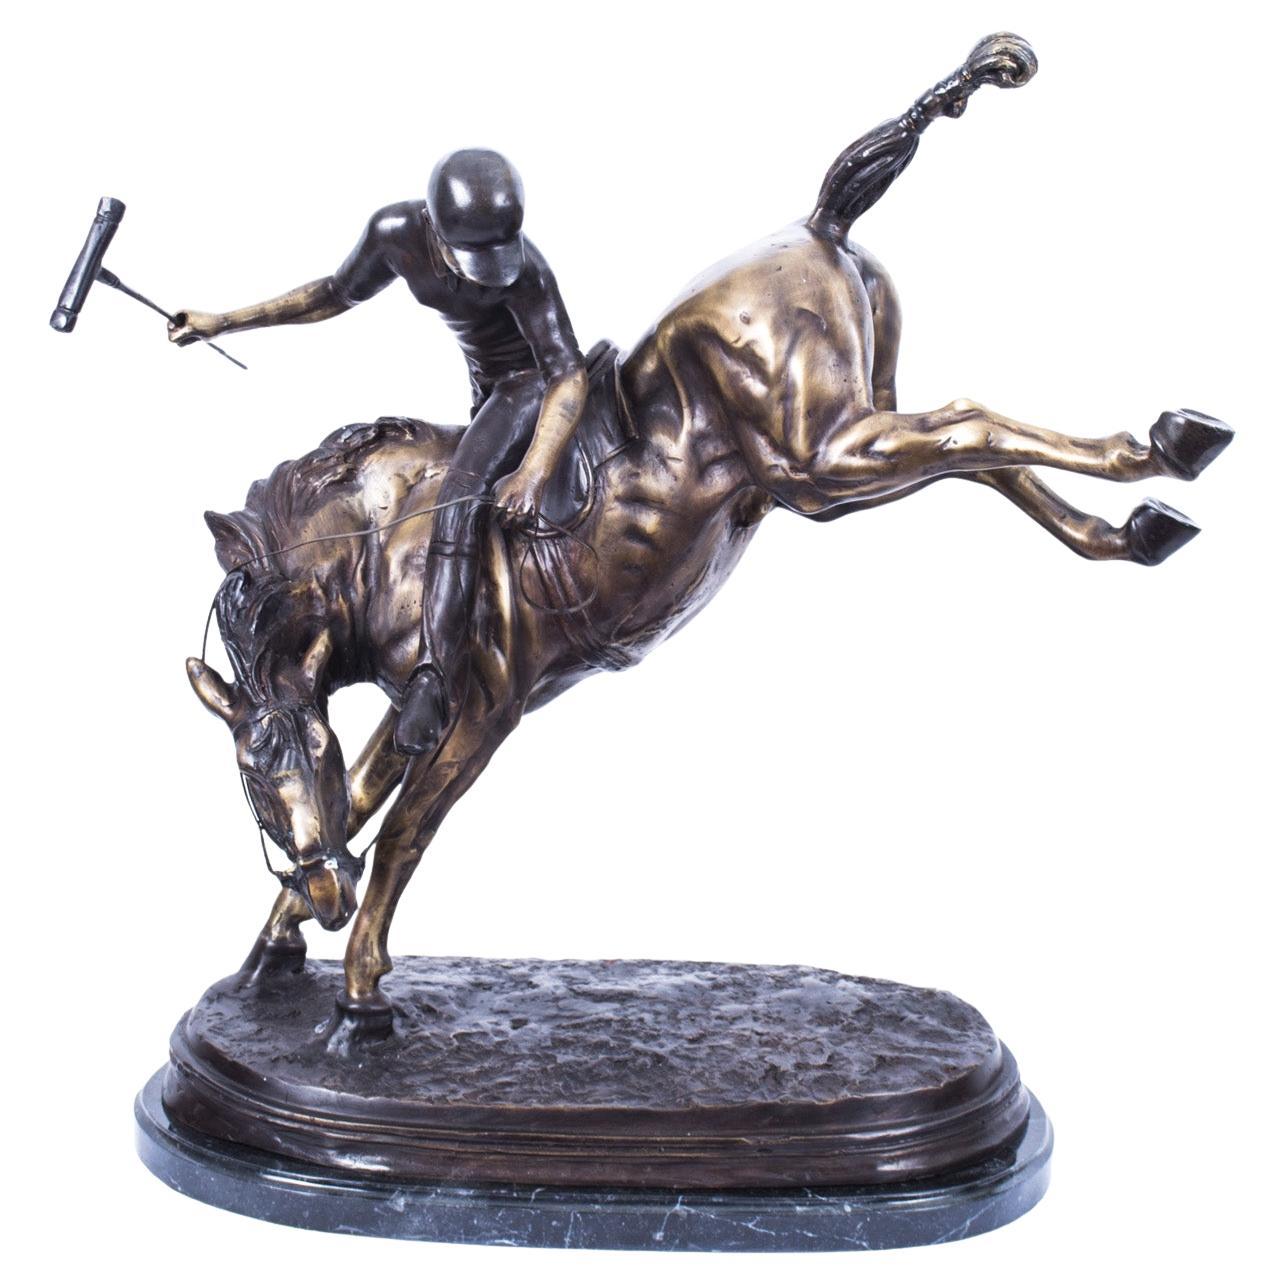 Vintage Bronze Polo Player Bucking a Horse Sculpture, 20th Century